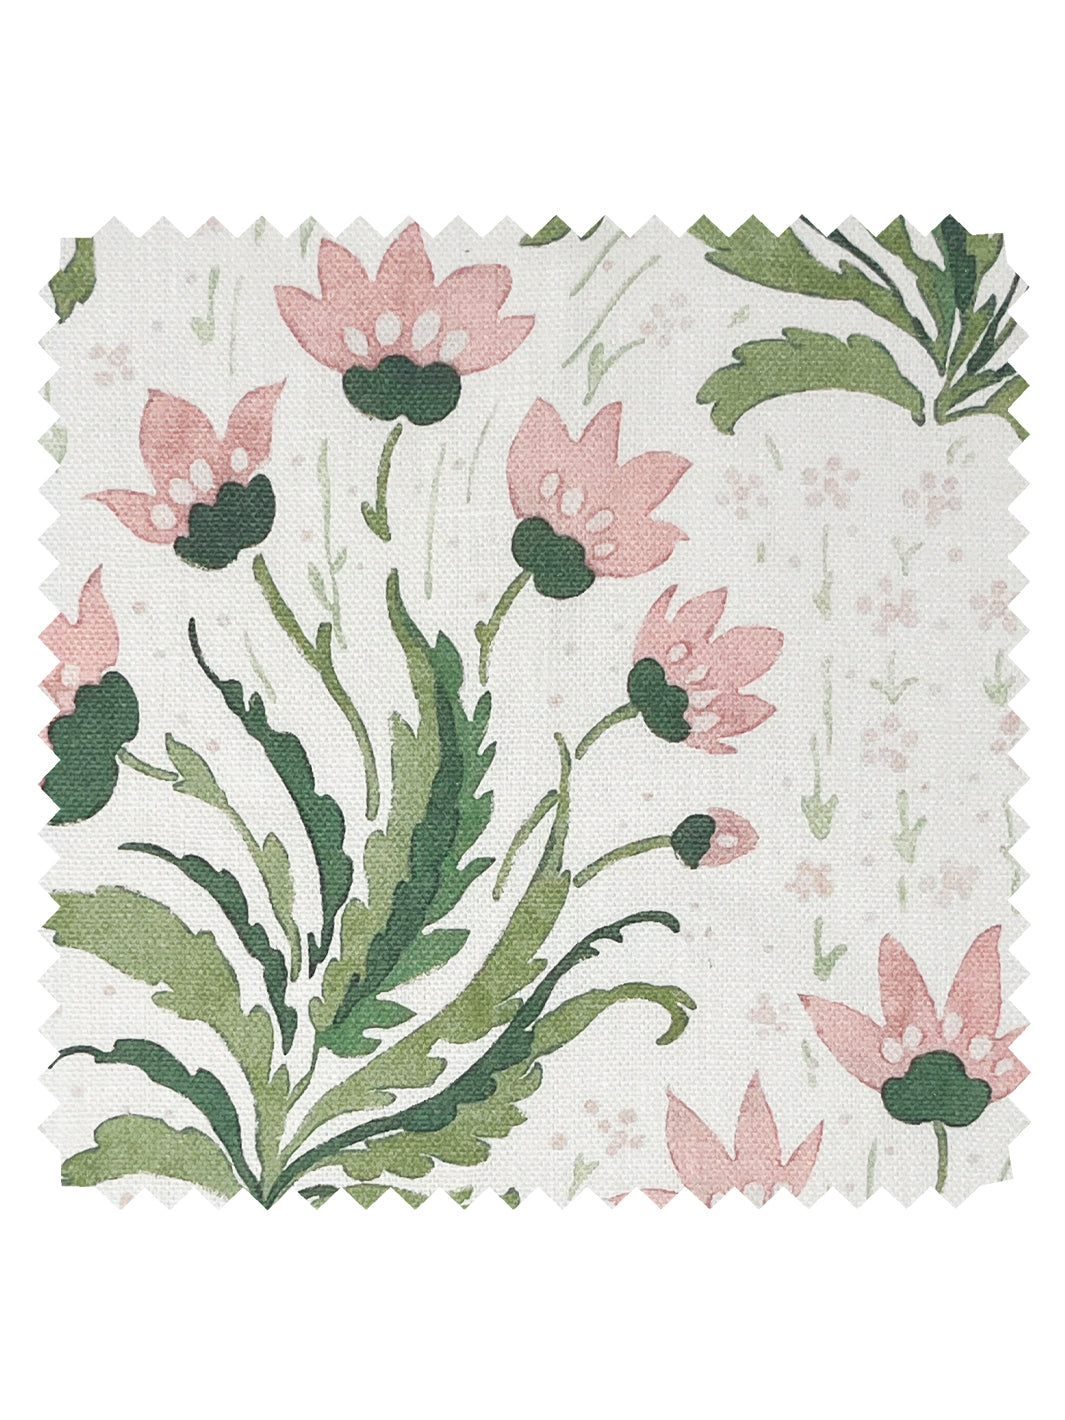 'Hillhouse Floral Multi' Linen Fabric by Nathan Turner - Pink Green